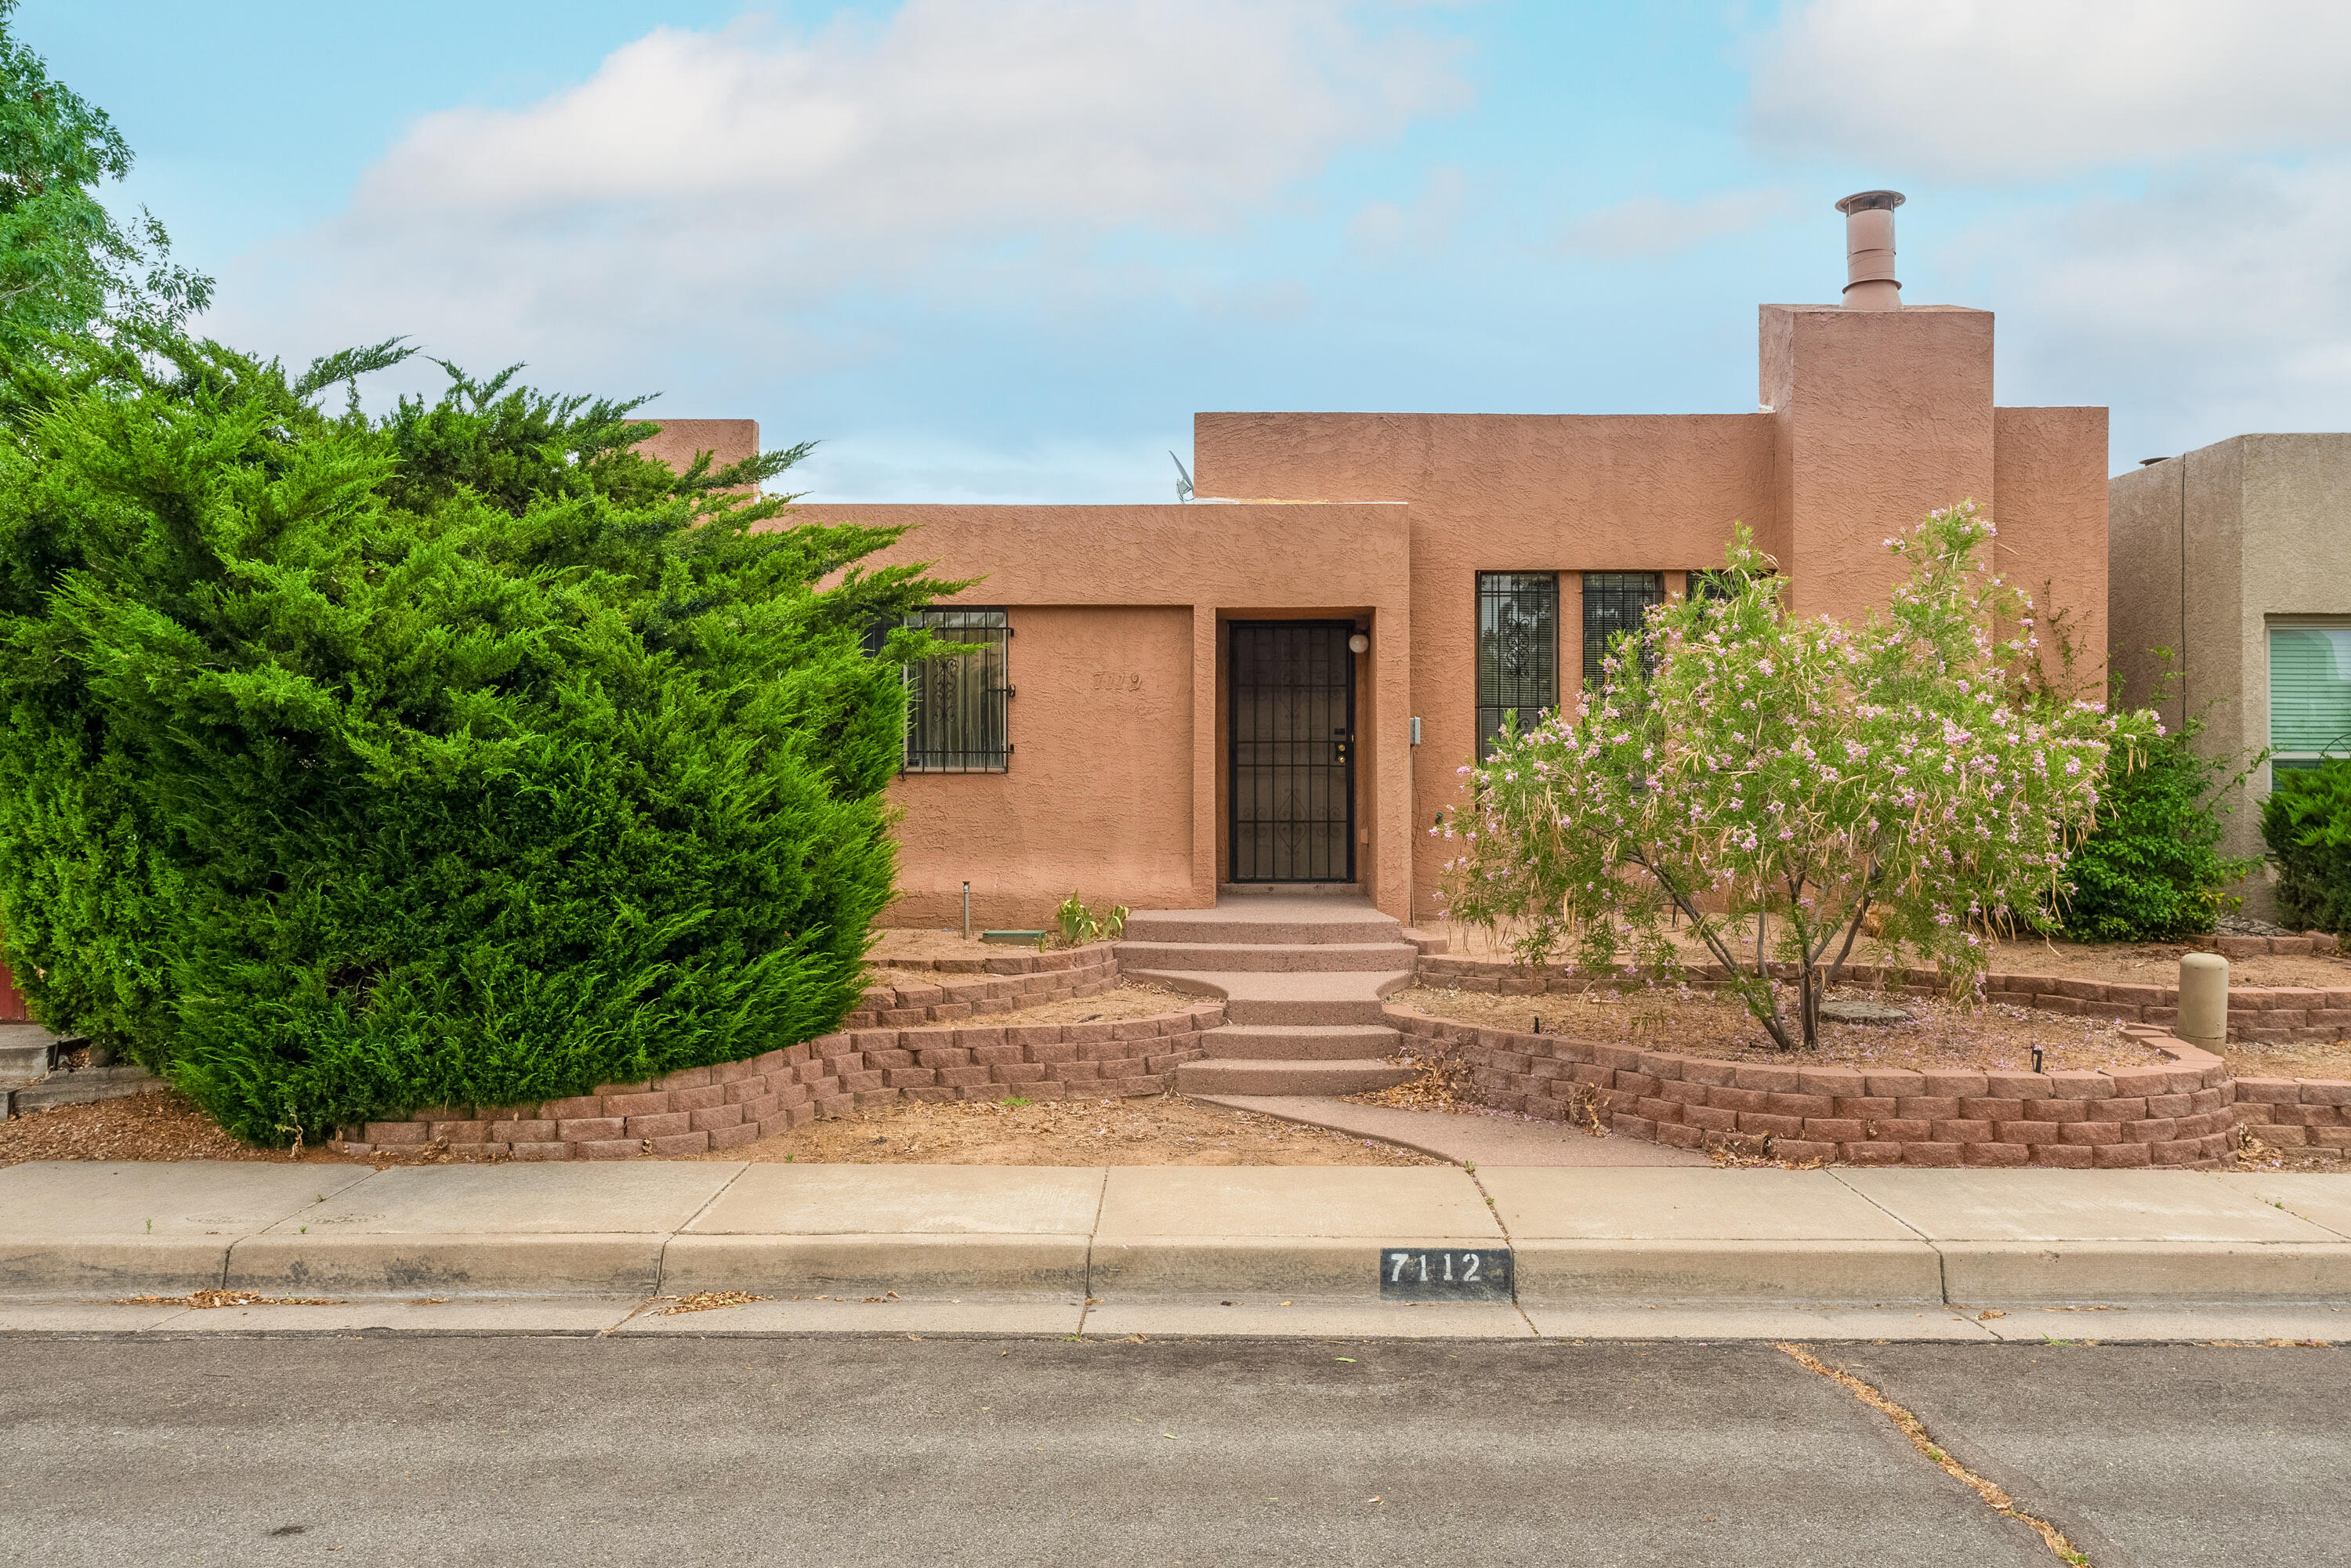 This La Cueva school district cutie is a total gem! This three bedroom, 2 bath, lovely little townhome is attached only at the garage, features a private courtyard and side yard, a 2 car garage, and a functional and open floor plan. With a little cosmetic glow up, this home will shine! Come take a look!